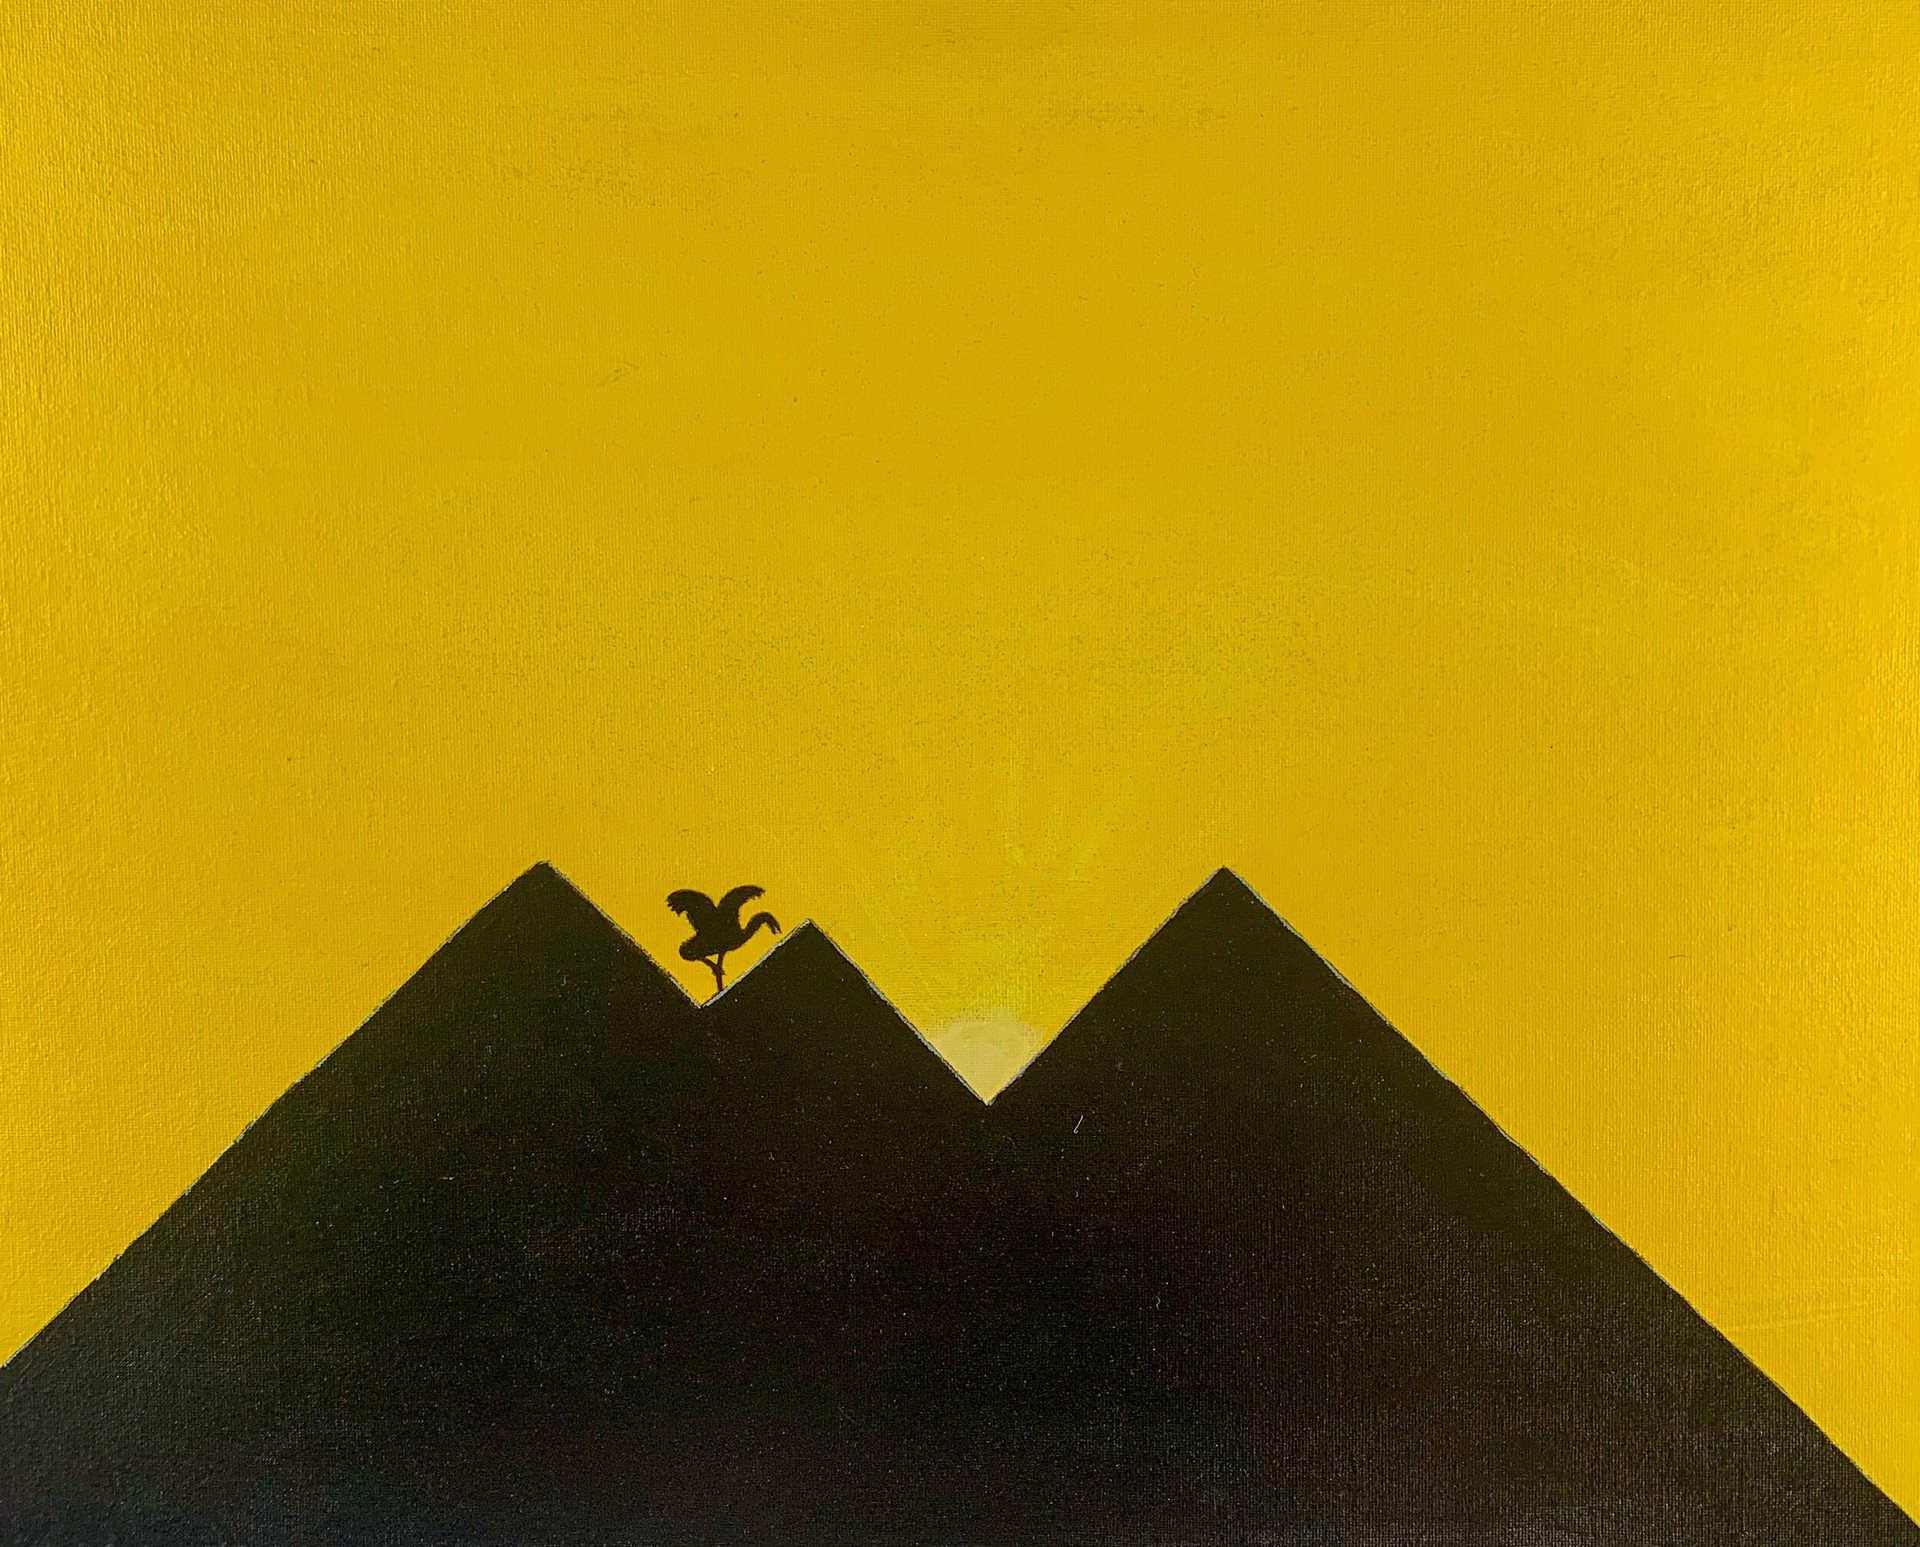 A Crane in Egypt by A.V.